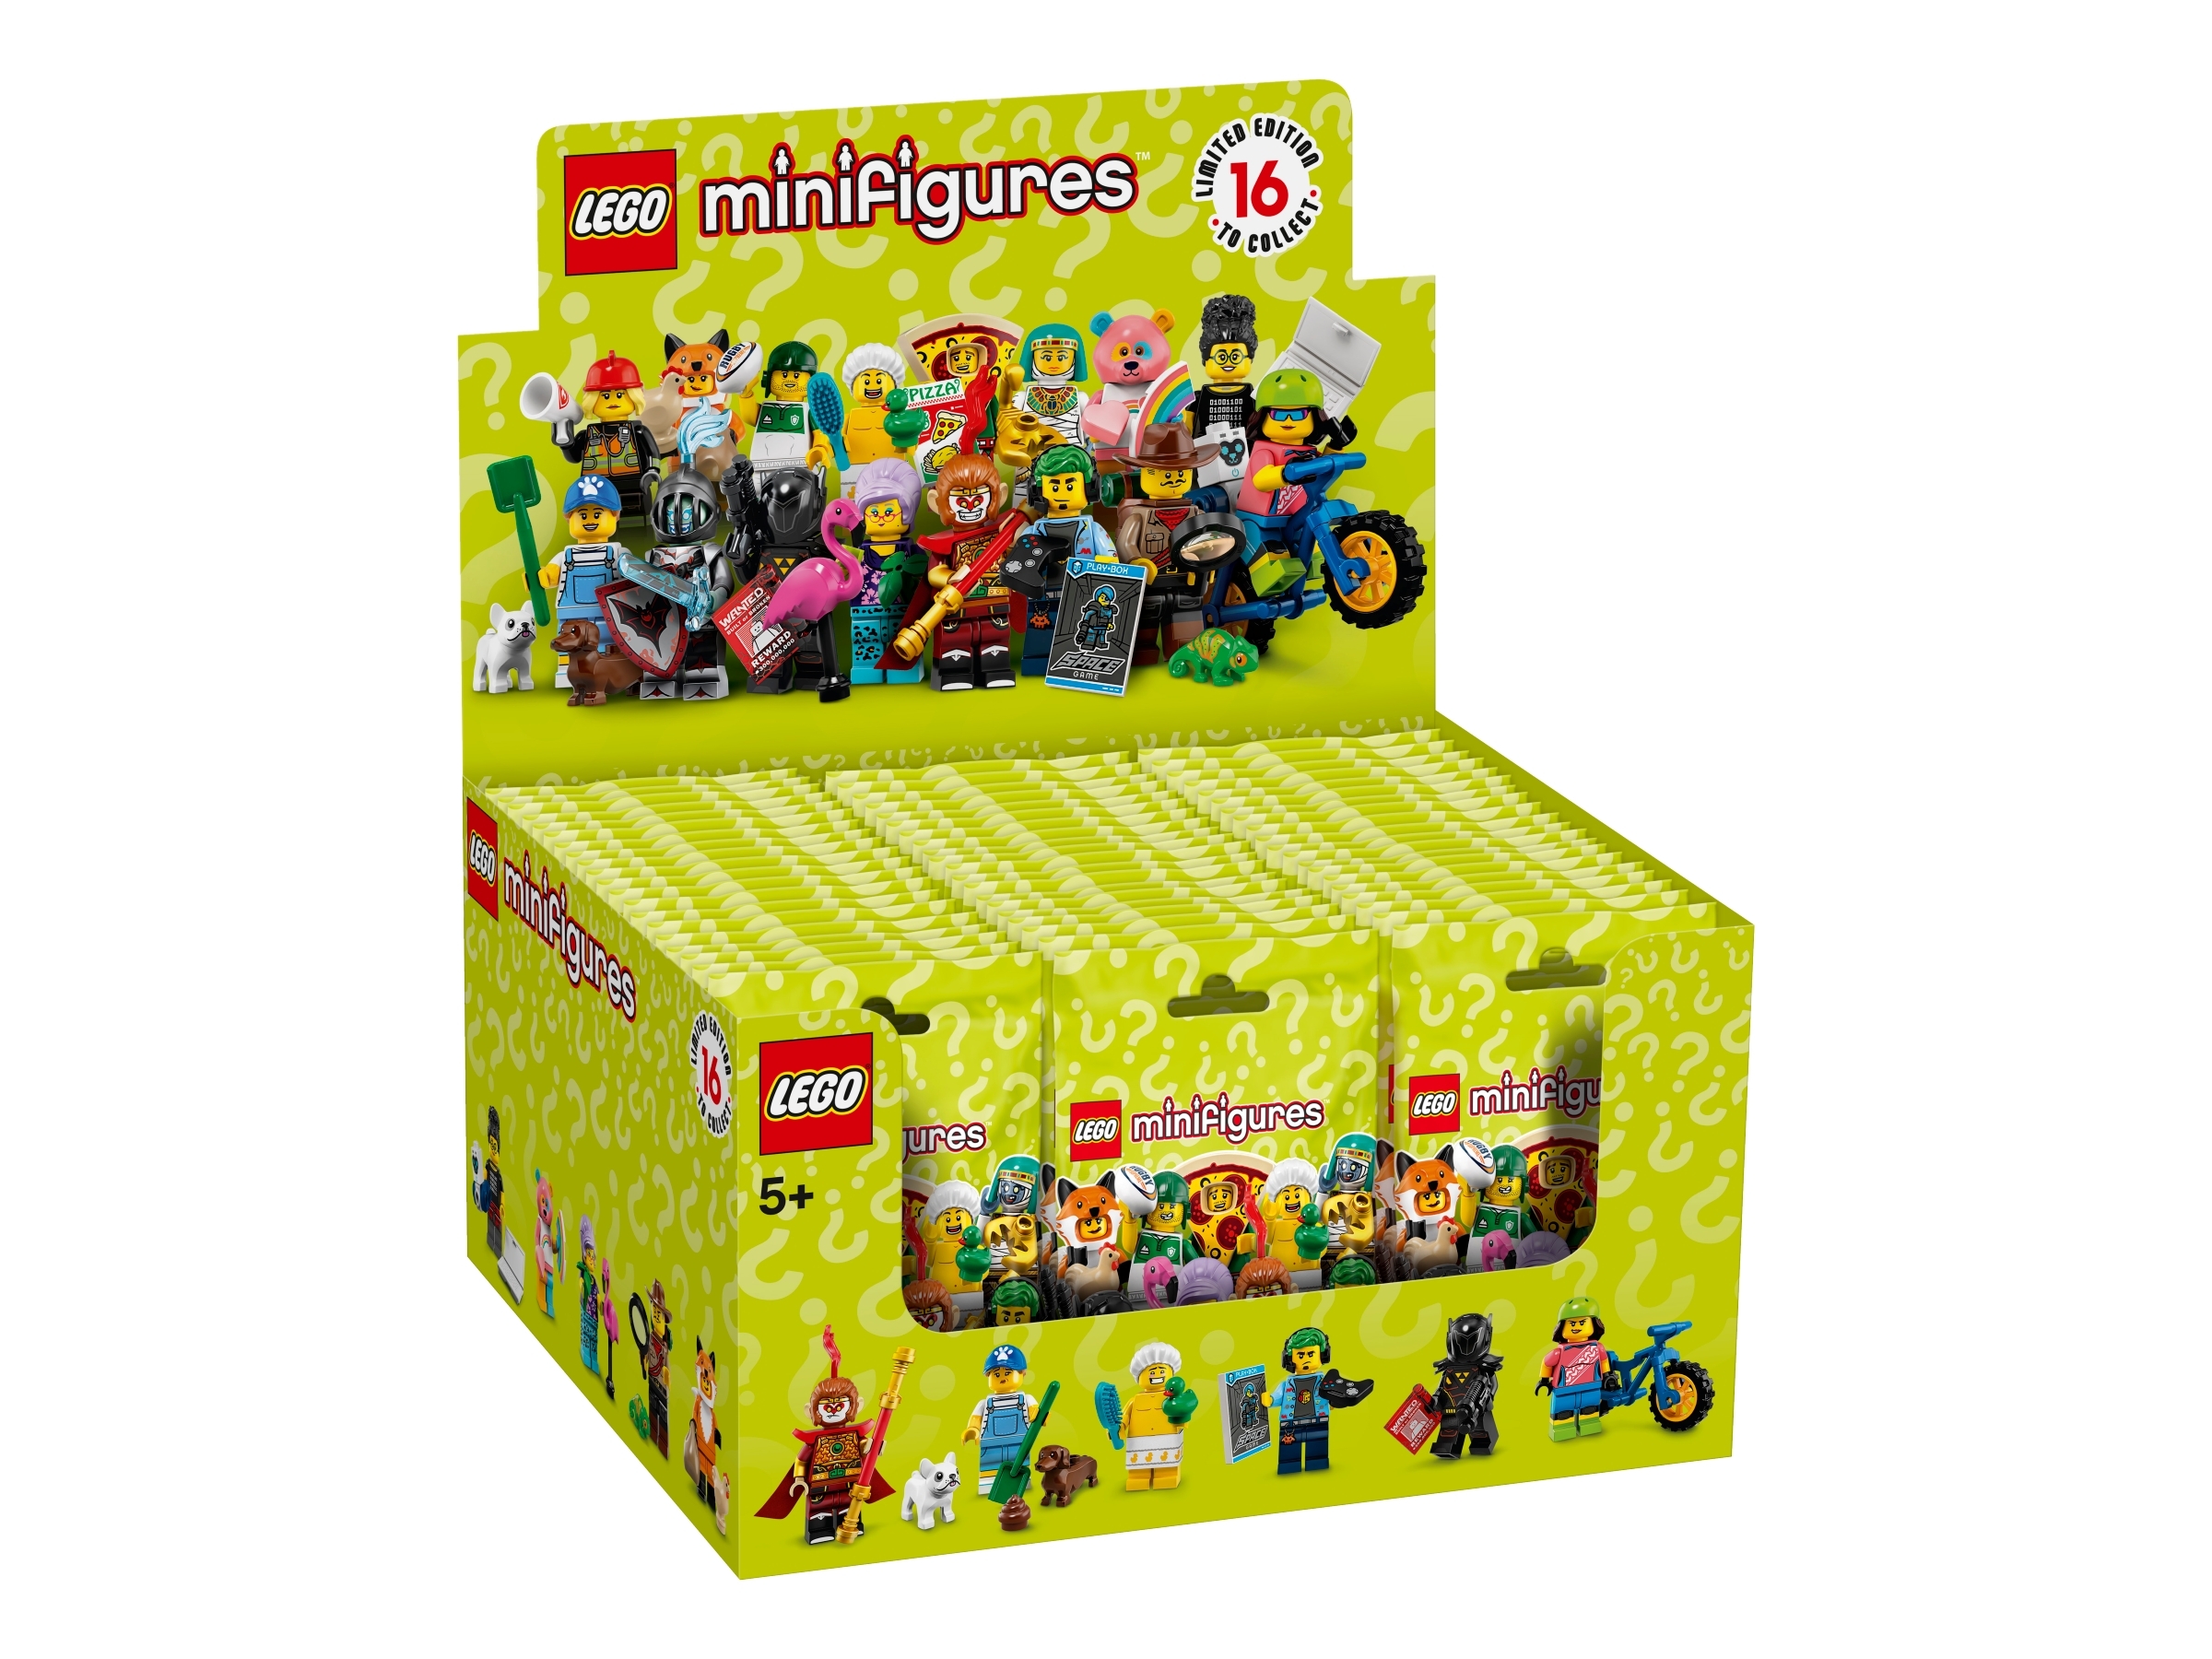 winkelwagen investering negatief Series 19 complete box 66629 | Minifigures | Buy online at the Official LEGO®  Shop US